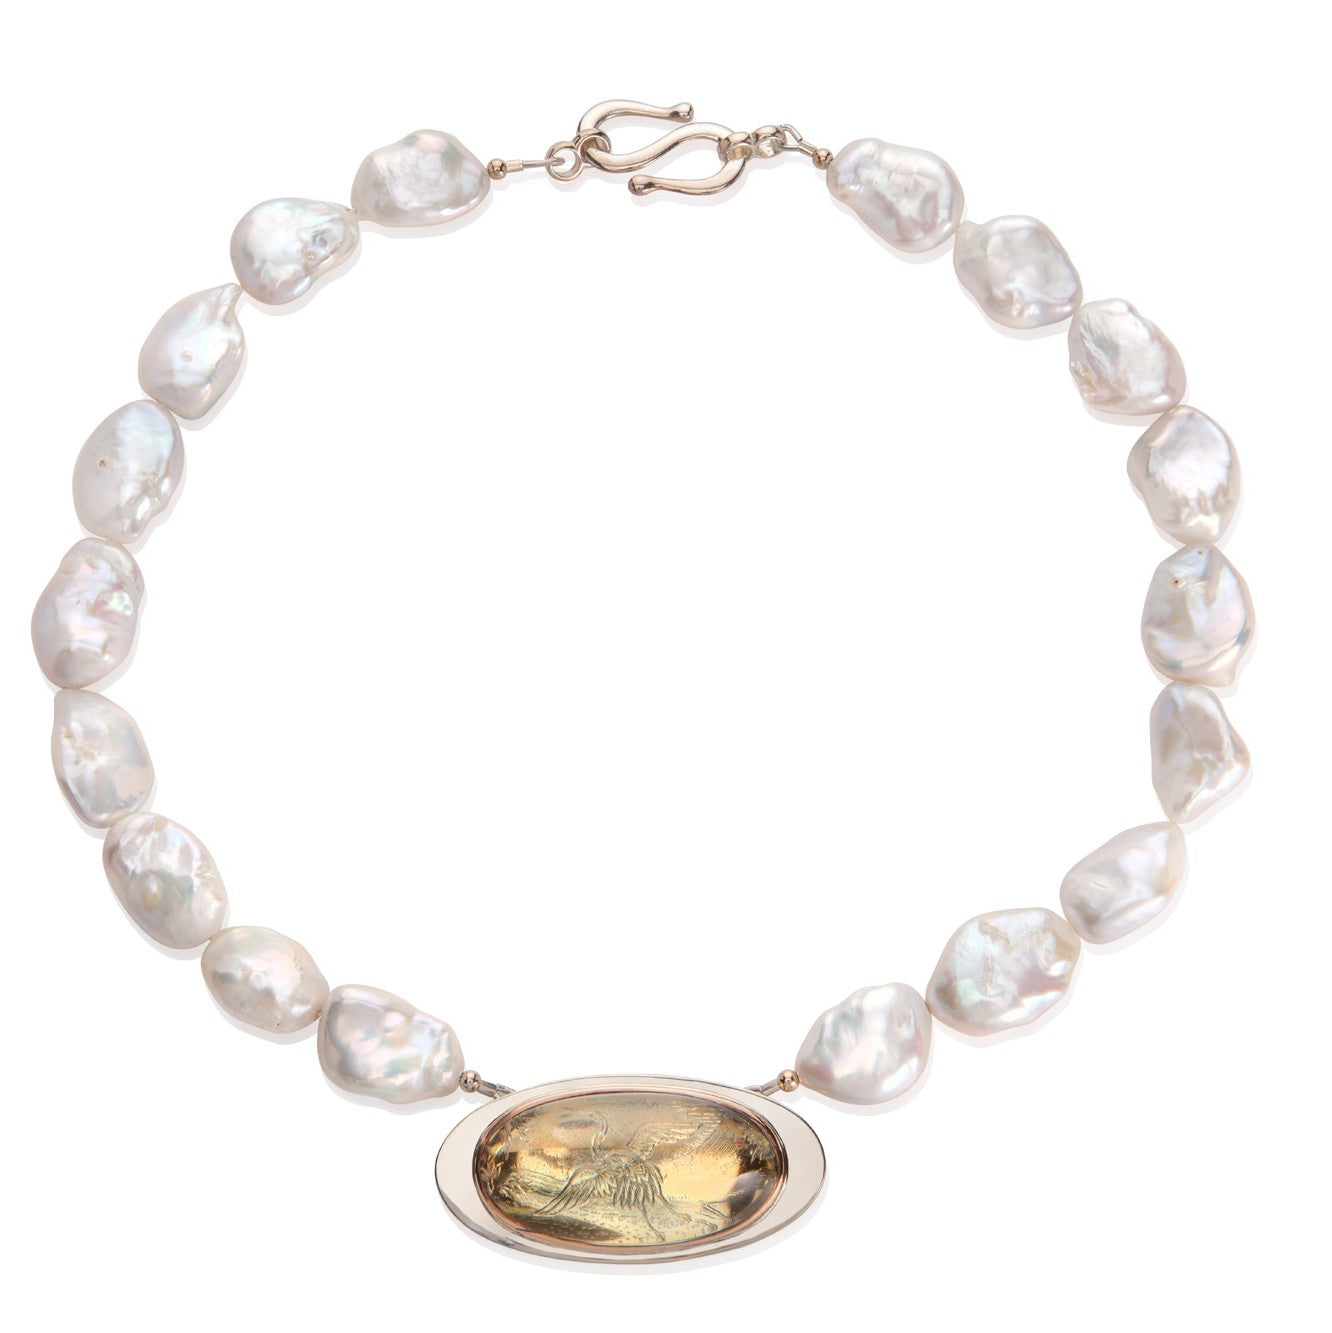 Stunning Keshi Pearl Necklace with engraved ' Flying Crane ' centrepiece